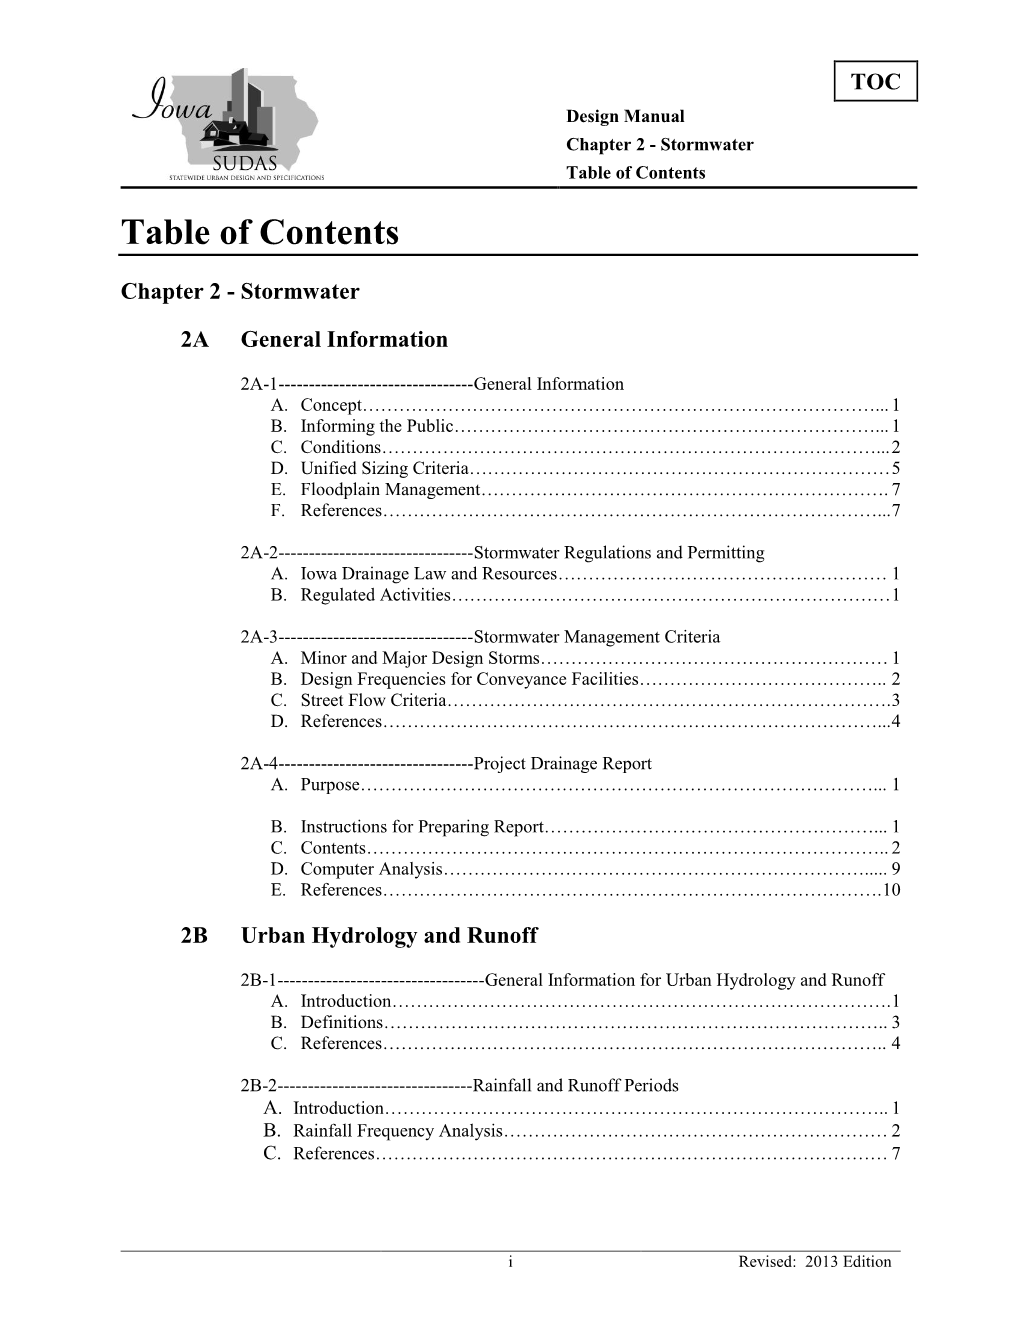 Stormwater Table of Contents